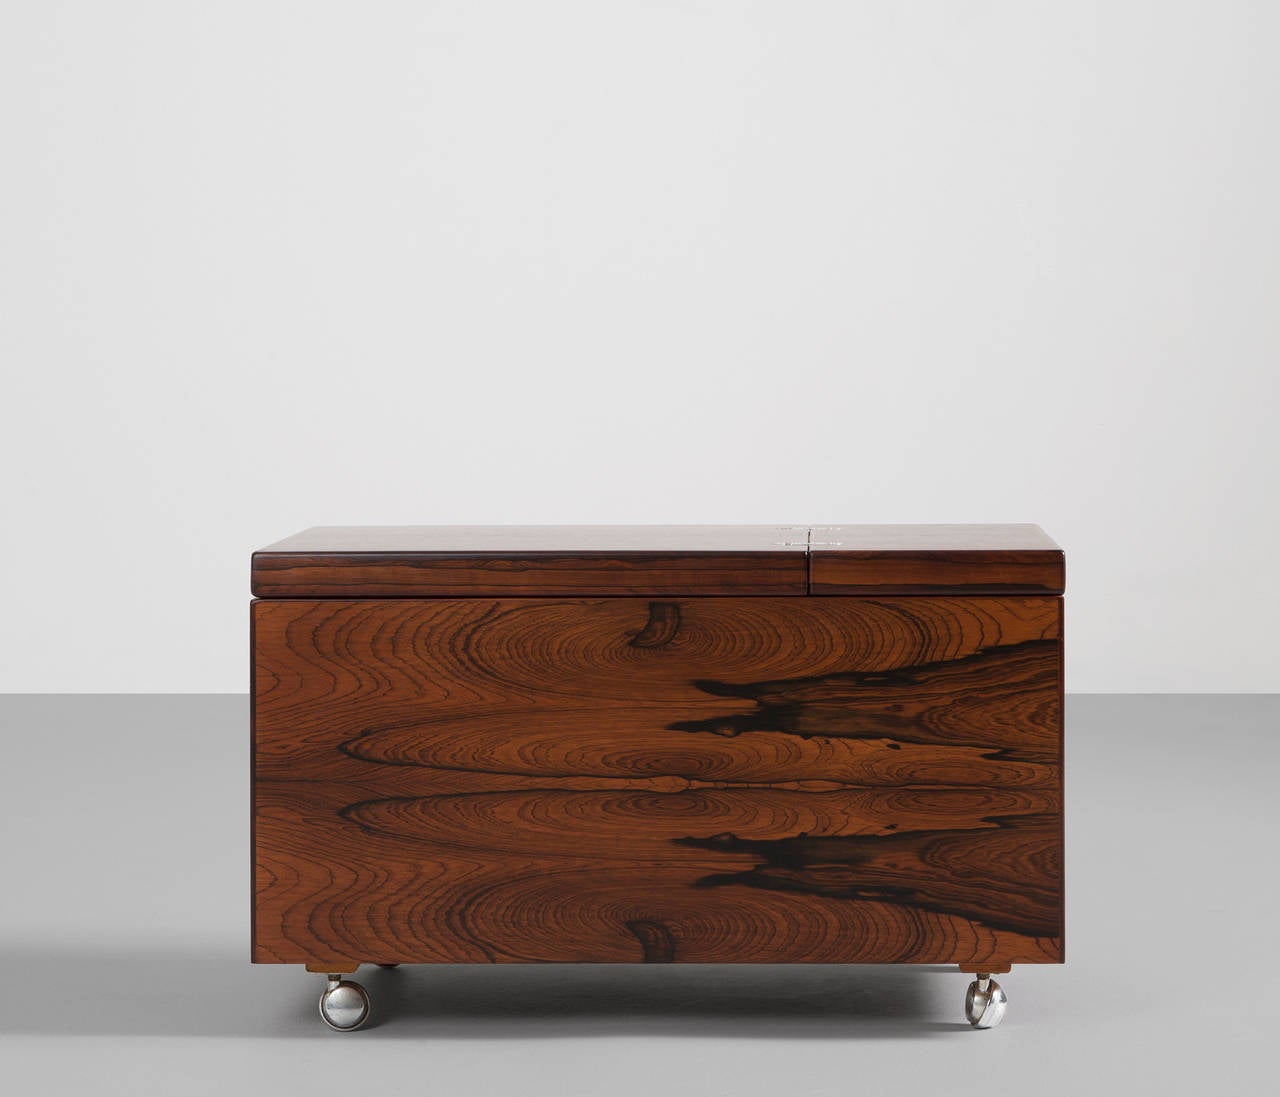 Luxurious mobile liquor bar cabinet made of Brazilian rosewood.
The top of the bar is easy to fold open due the elegant and well designed chrome hinges with also creates a very nice contrast.

When folded open, the partly red covered top serves